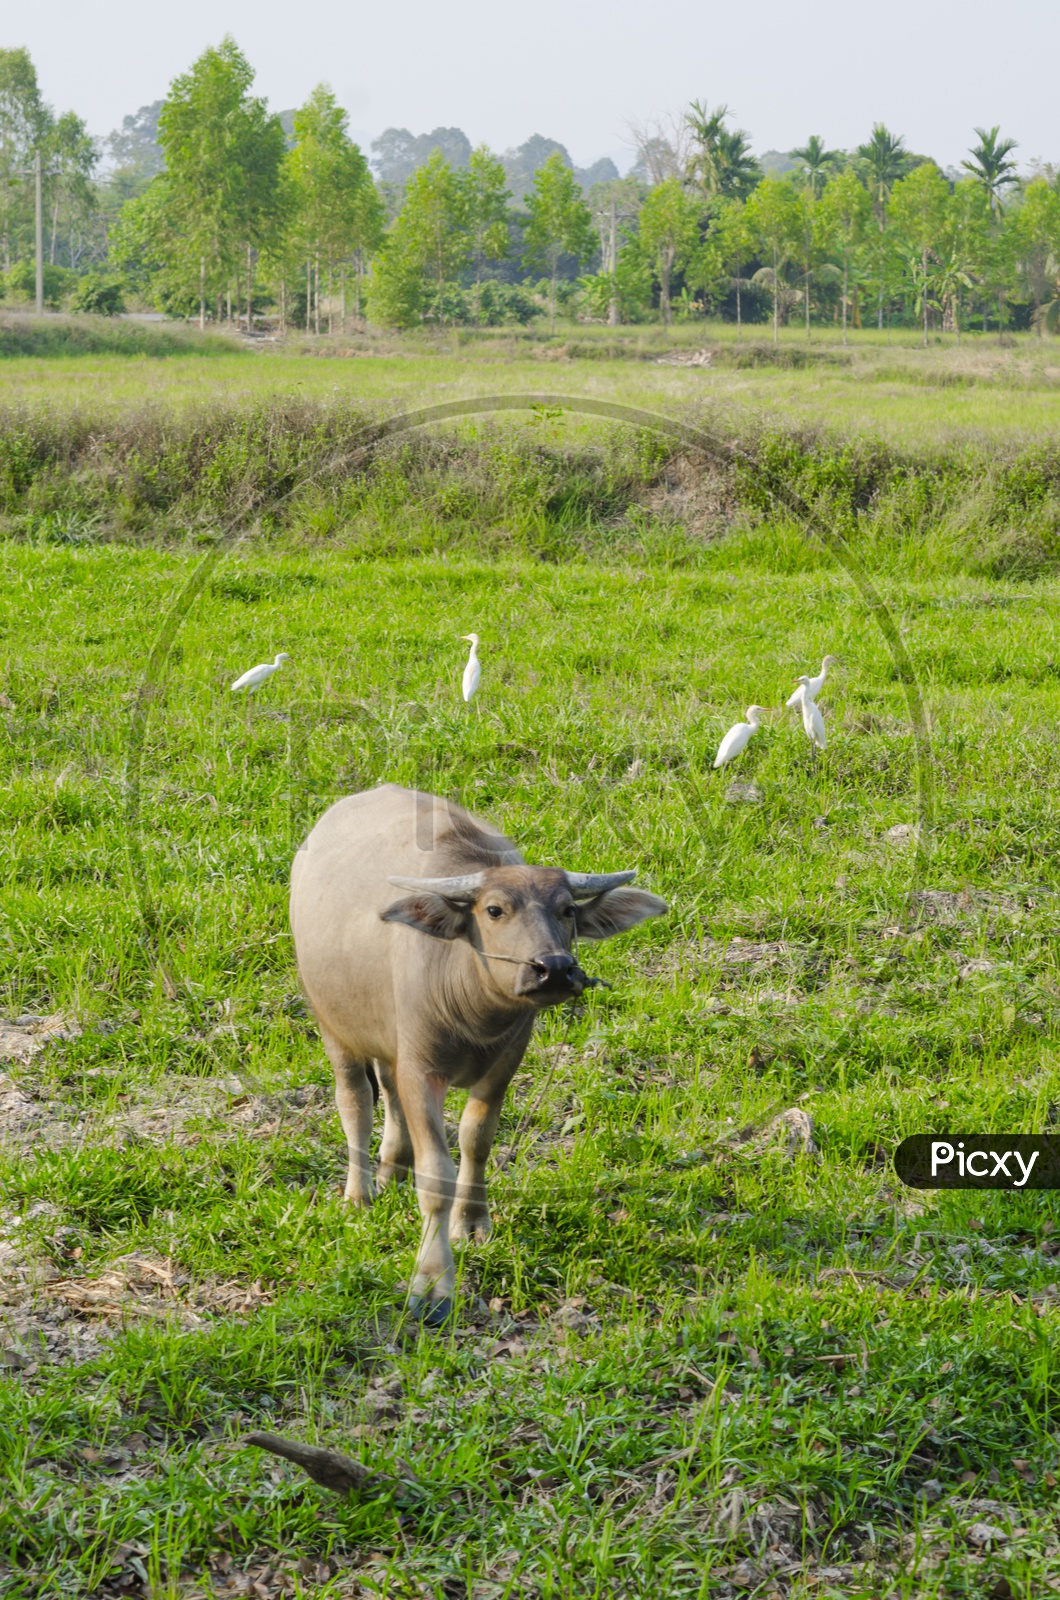 Water buffalo in a Agriculture Field, Thailand